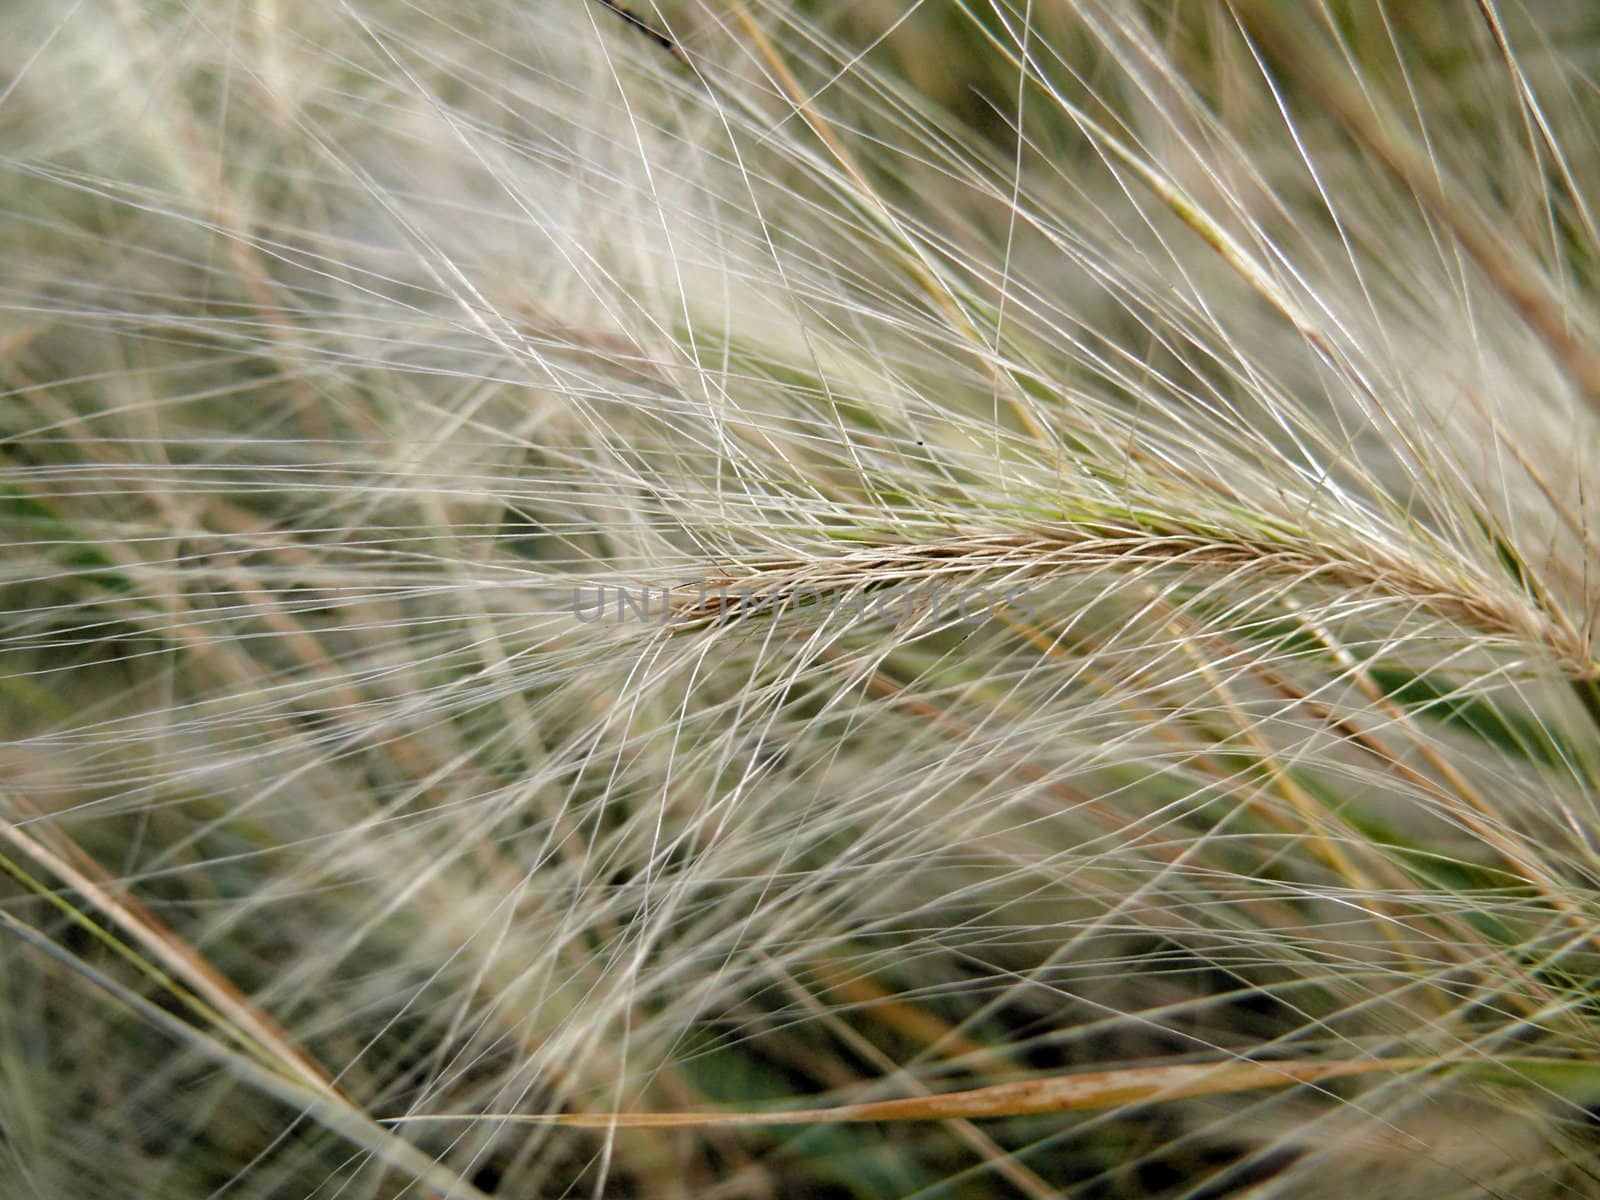 Texture of feather grass by Stoyanov